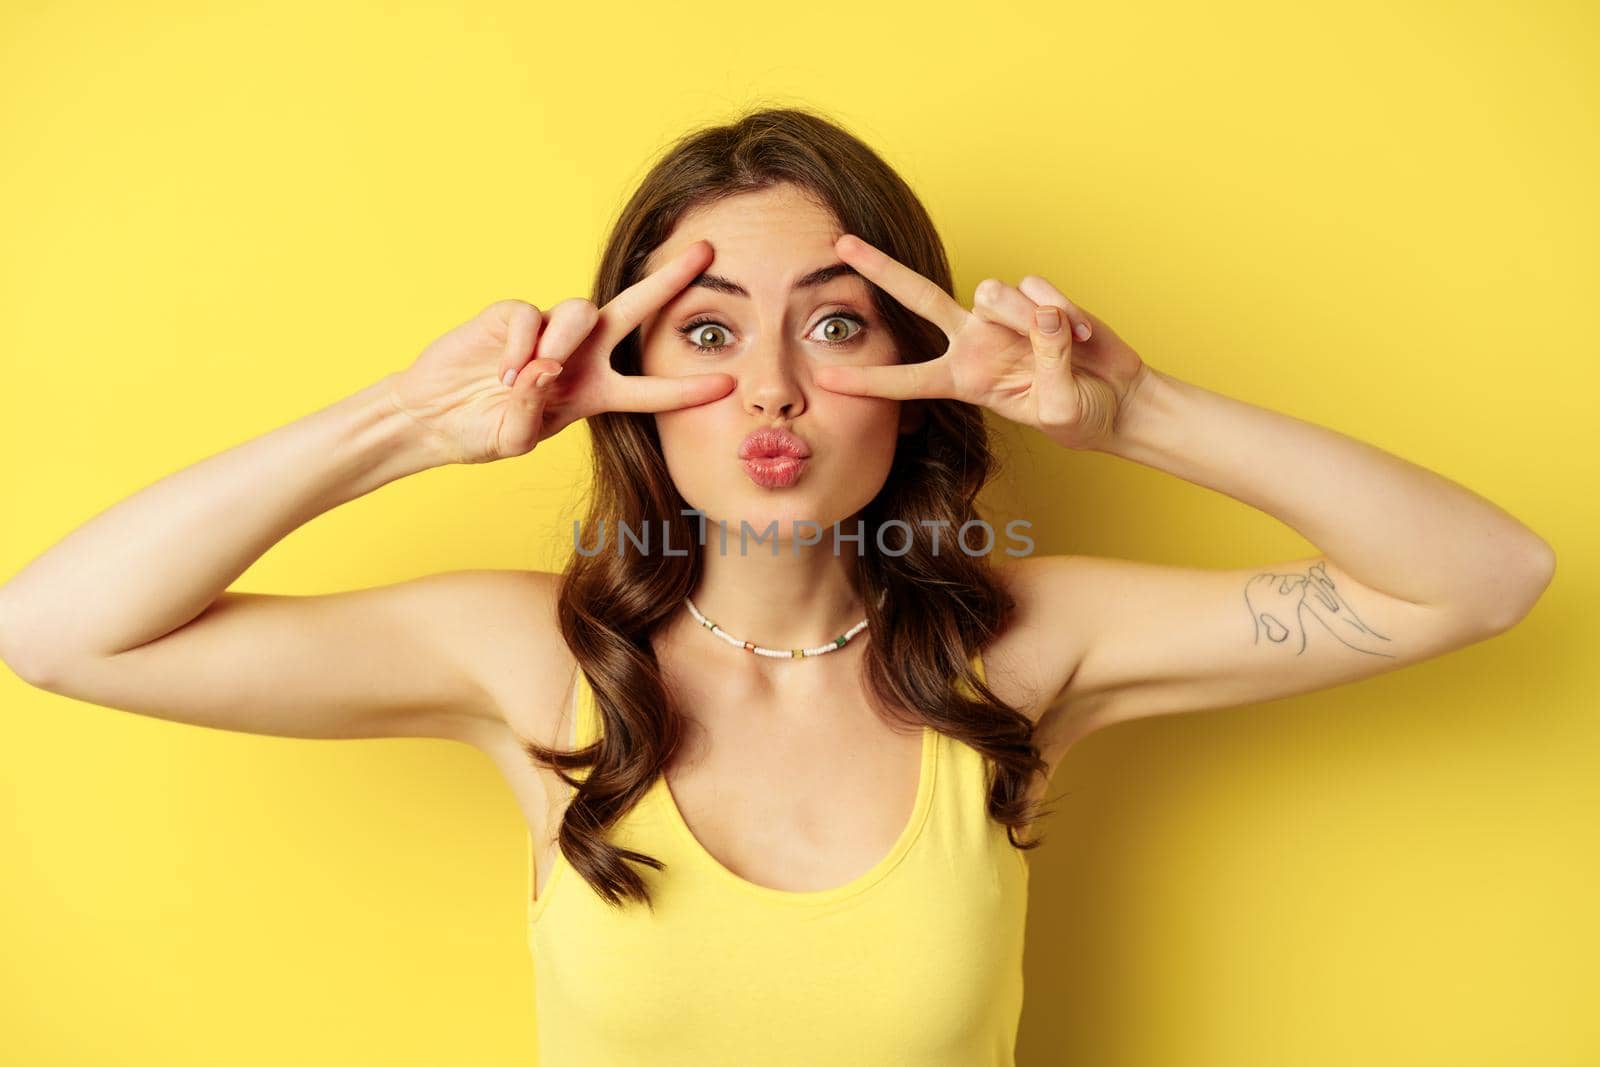 Close up portrait of smiling beautiful girl, showing peace v-sign and looking happy, posing for summer photo, standing against yellow background.